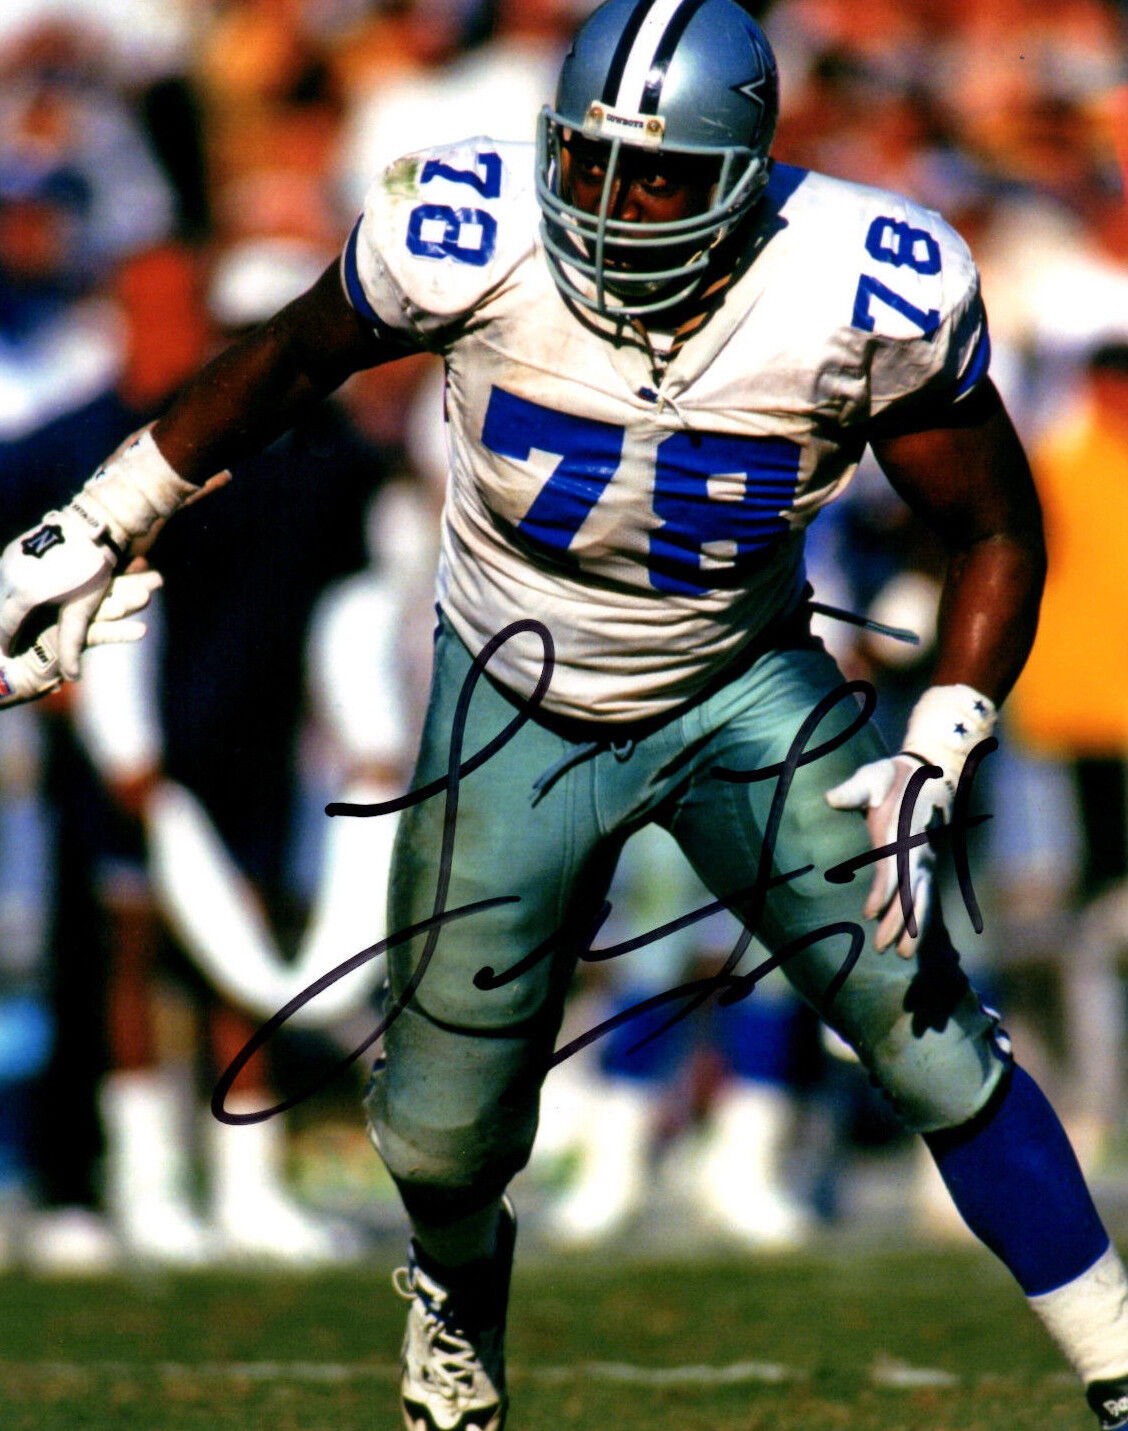 Leon Lett Dallas Cowboys hand auto signed football 8x10 Photo Poster painting Super Bowl Champ!